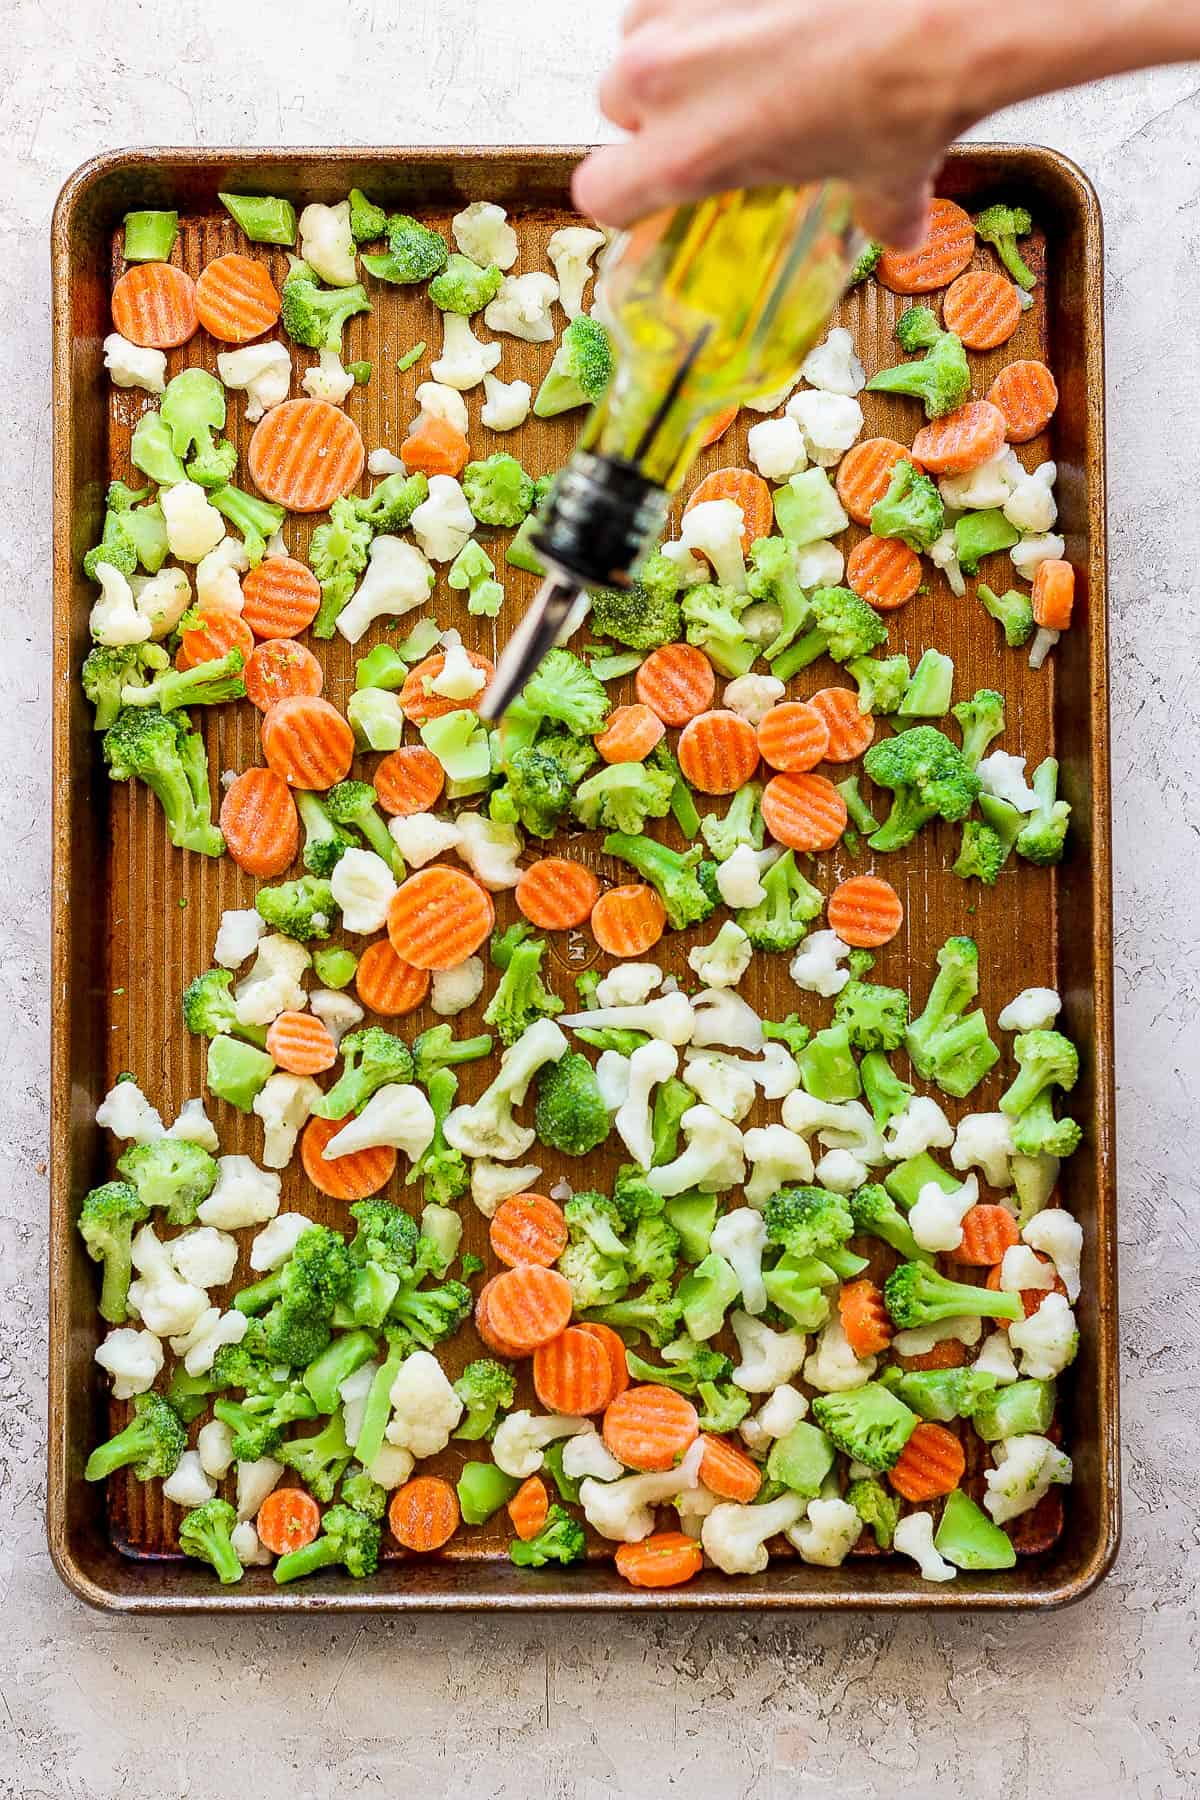 Frozen veggies on a rimmed baking sheet being drizzled with olive oil.